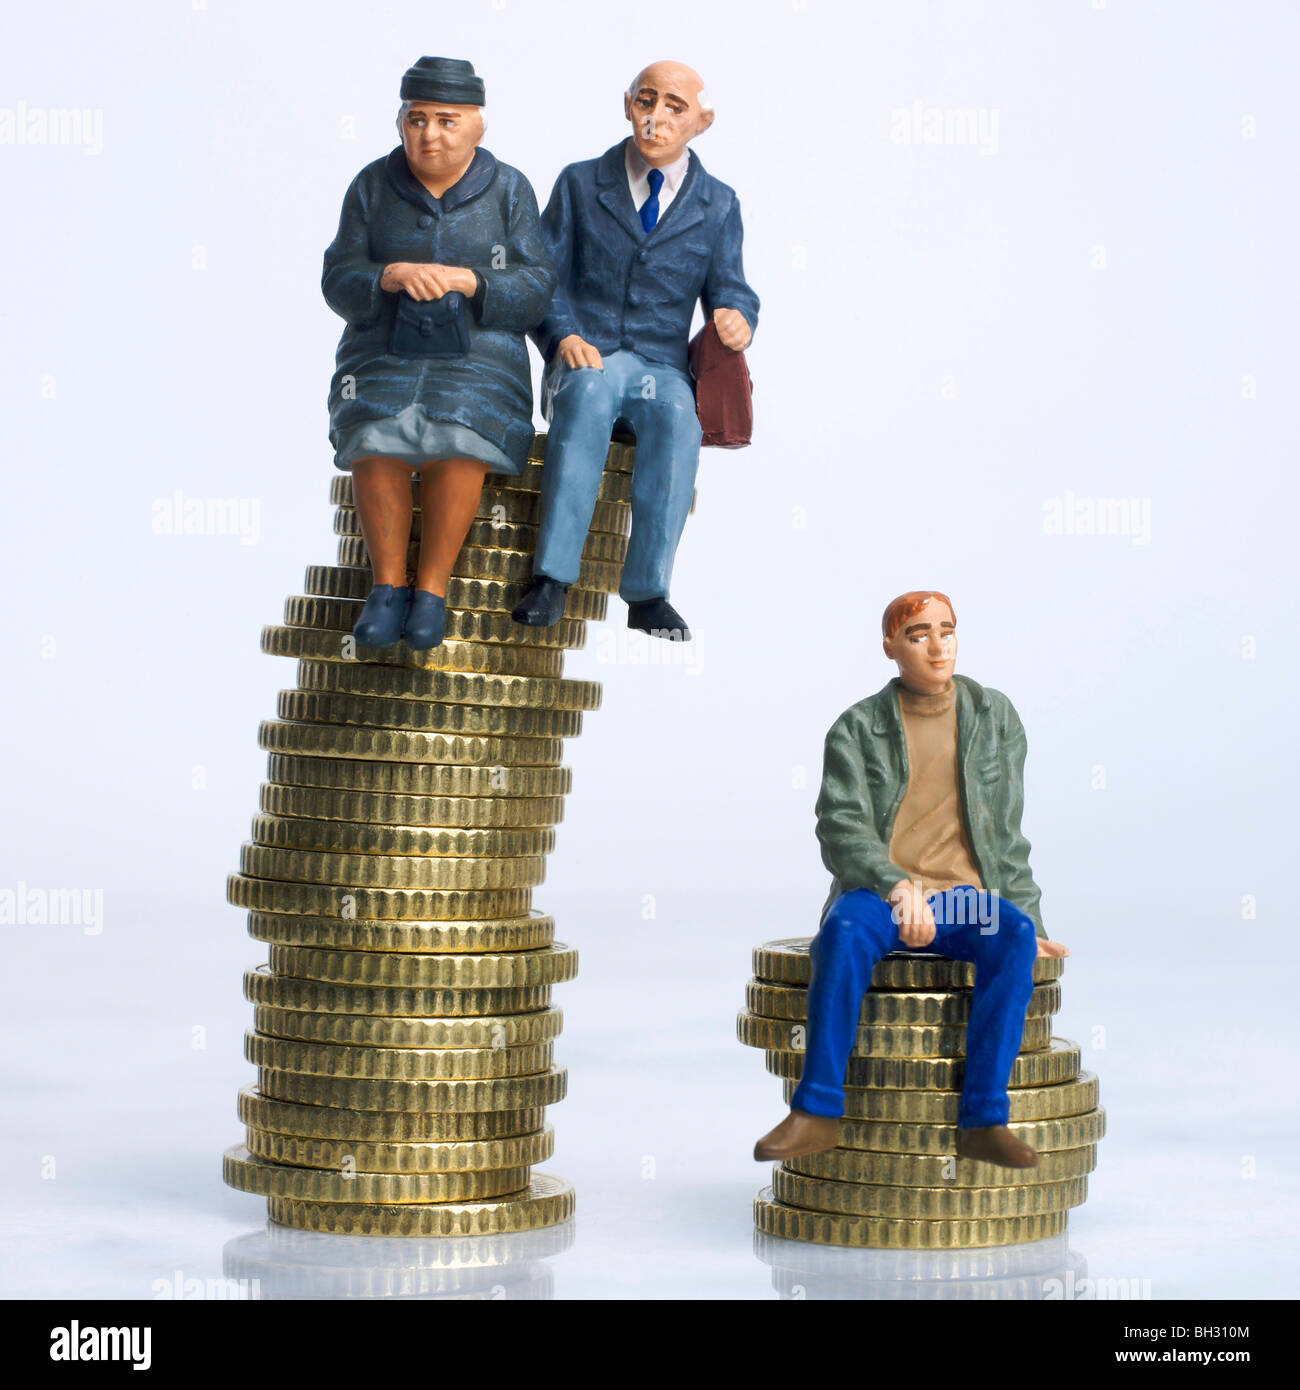 Old and young figures sitting on coins - inheritance / disparity in savings / pension money / old v young income concept Stock Photo